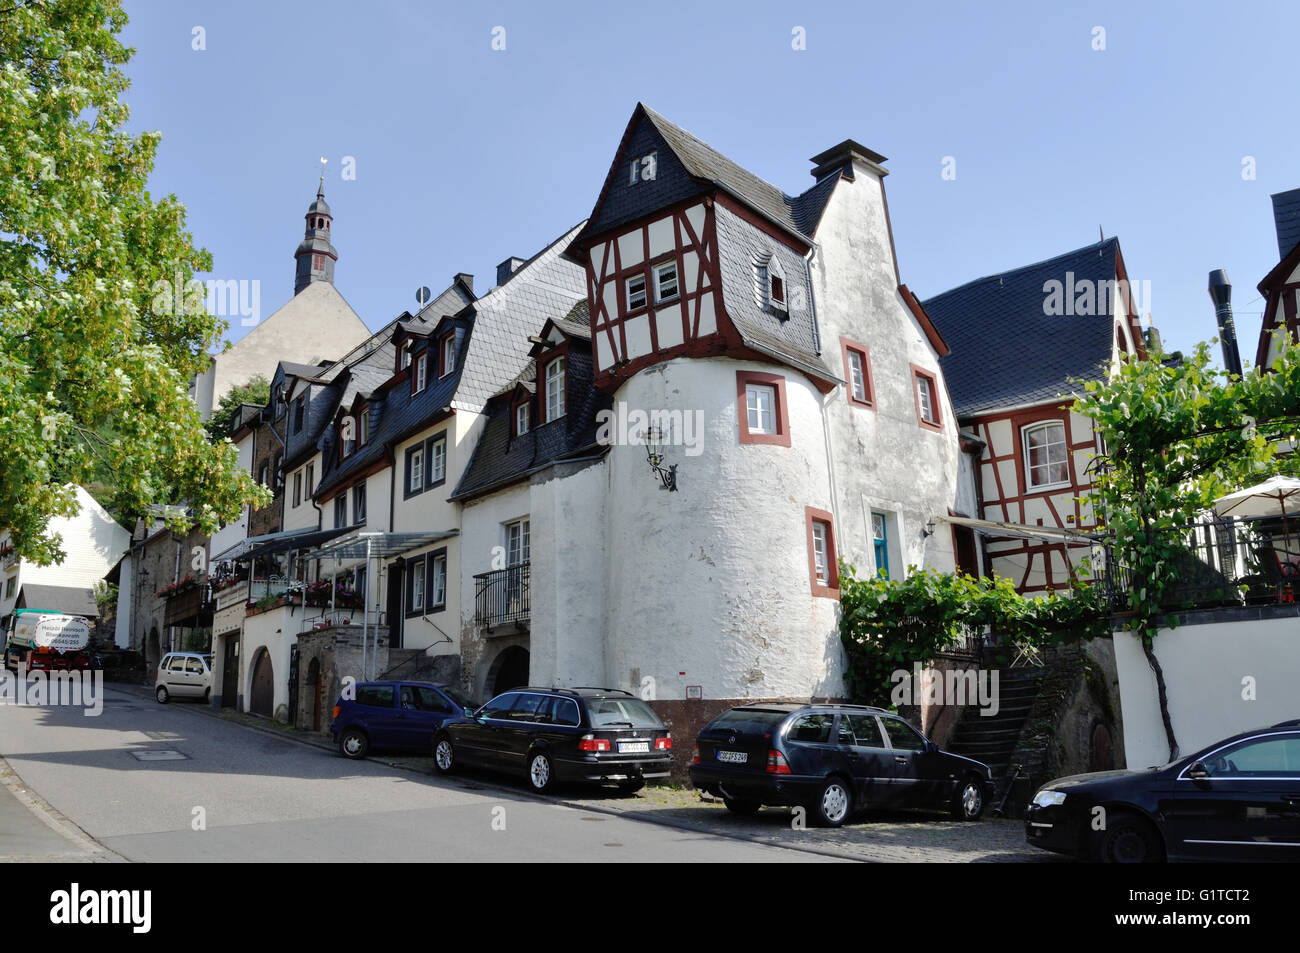 Architettura inusuale in Beilstein, sul fiume Moselle, Germania. Foto Stock